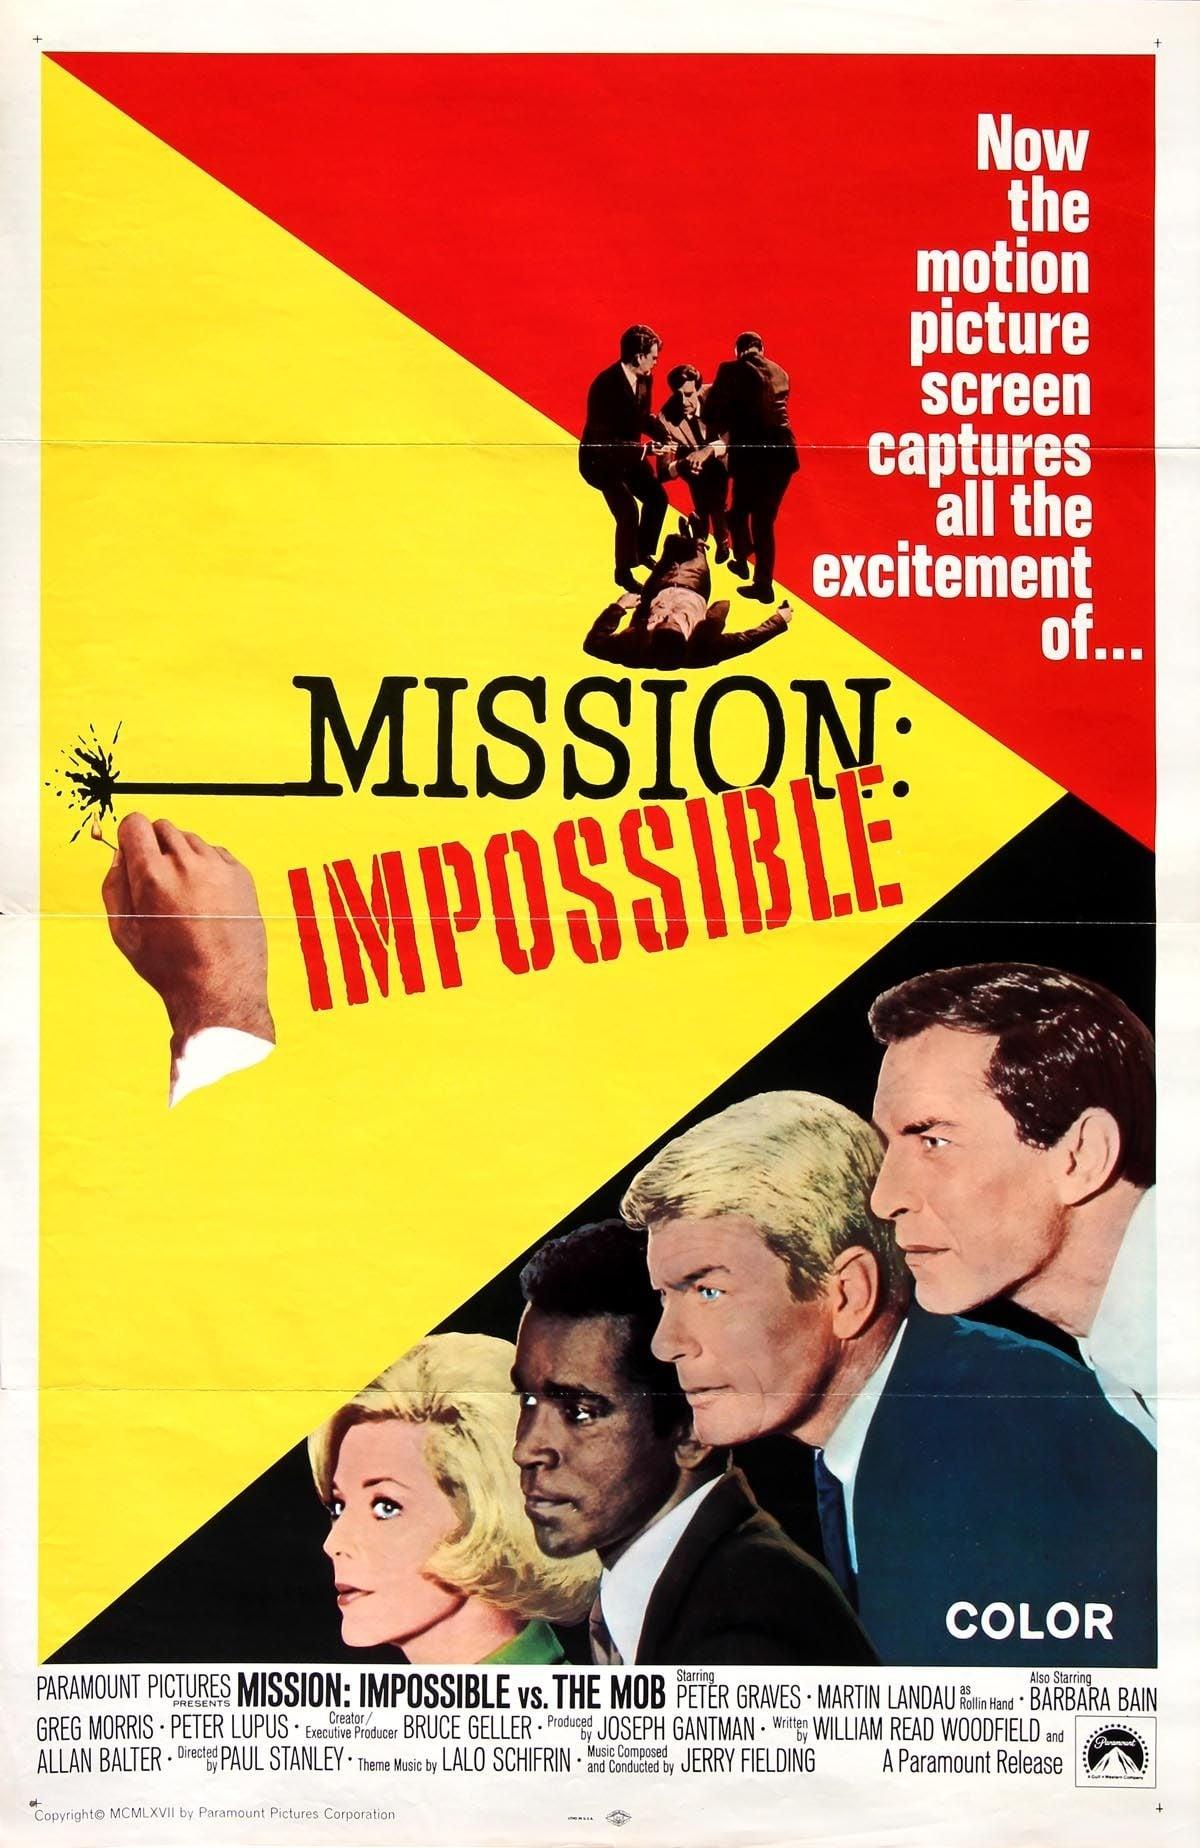 Mission: Impossible vs. the Mob poster